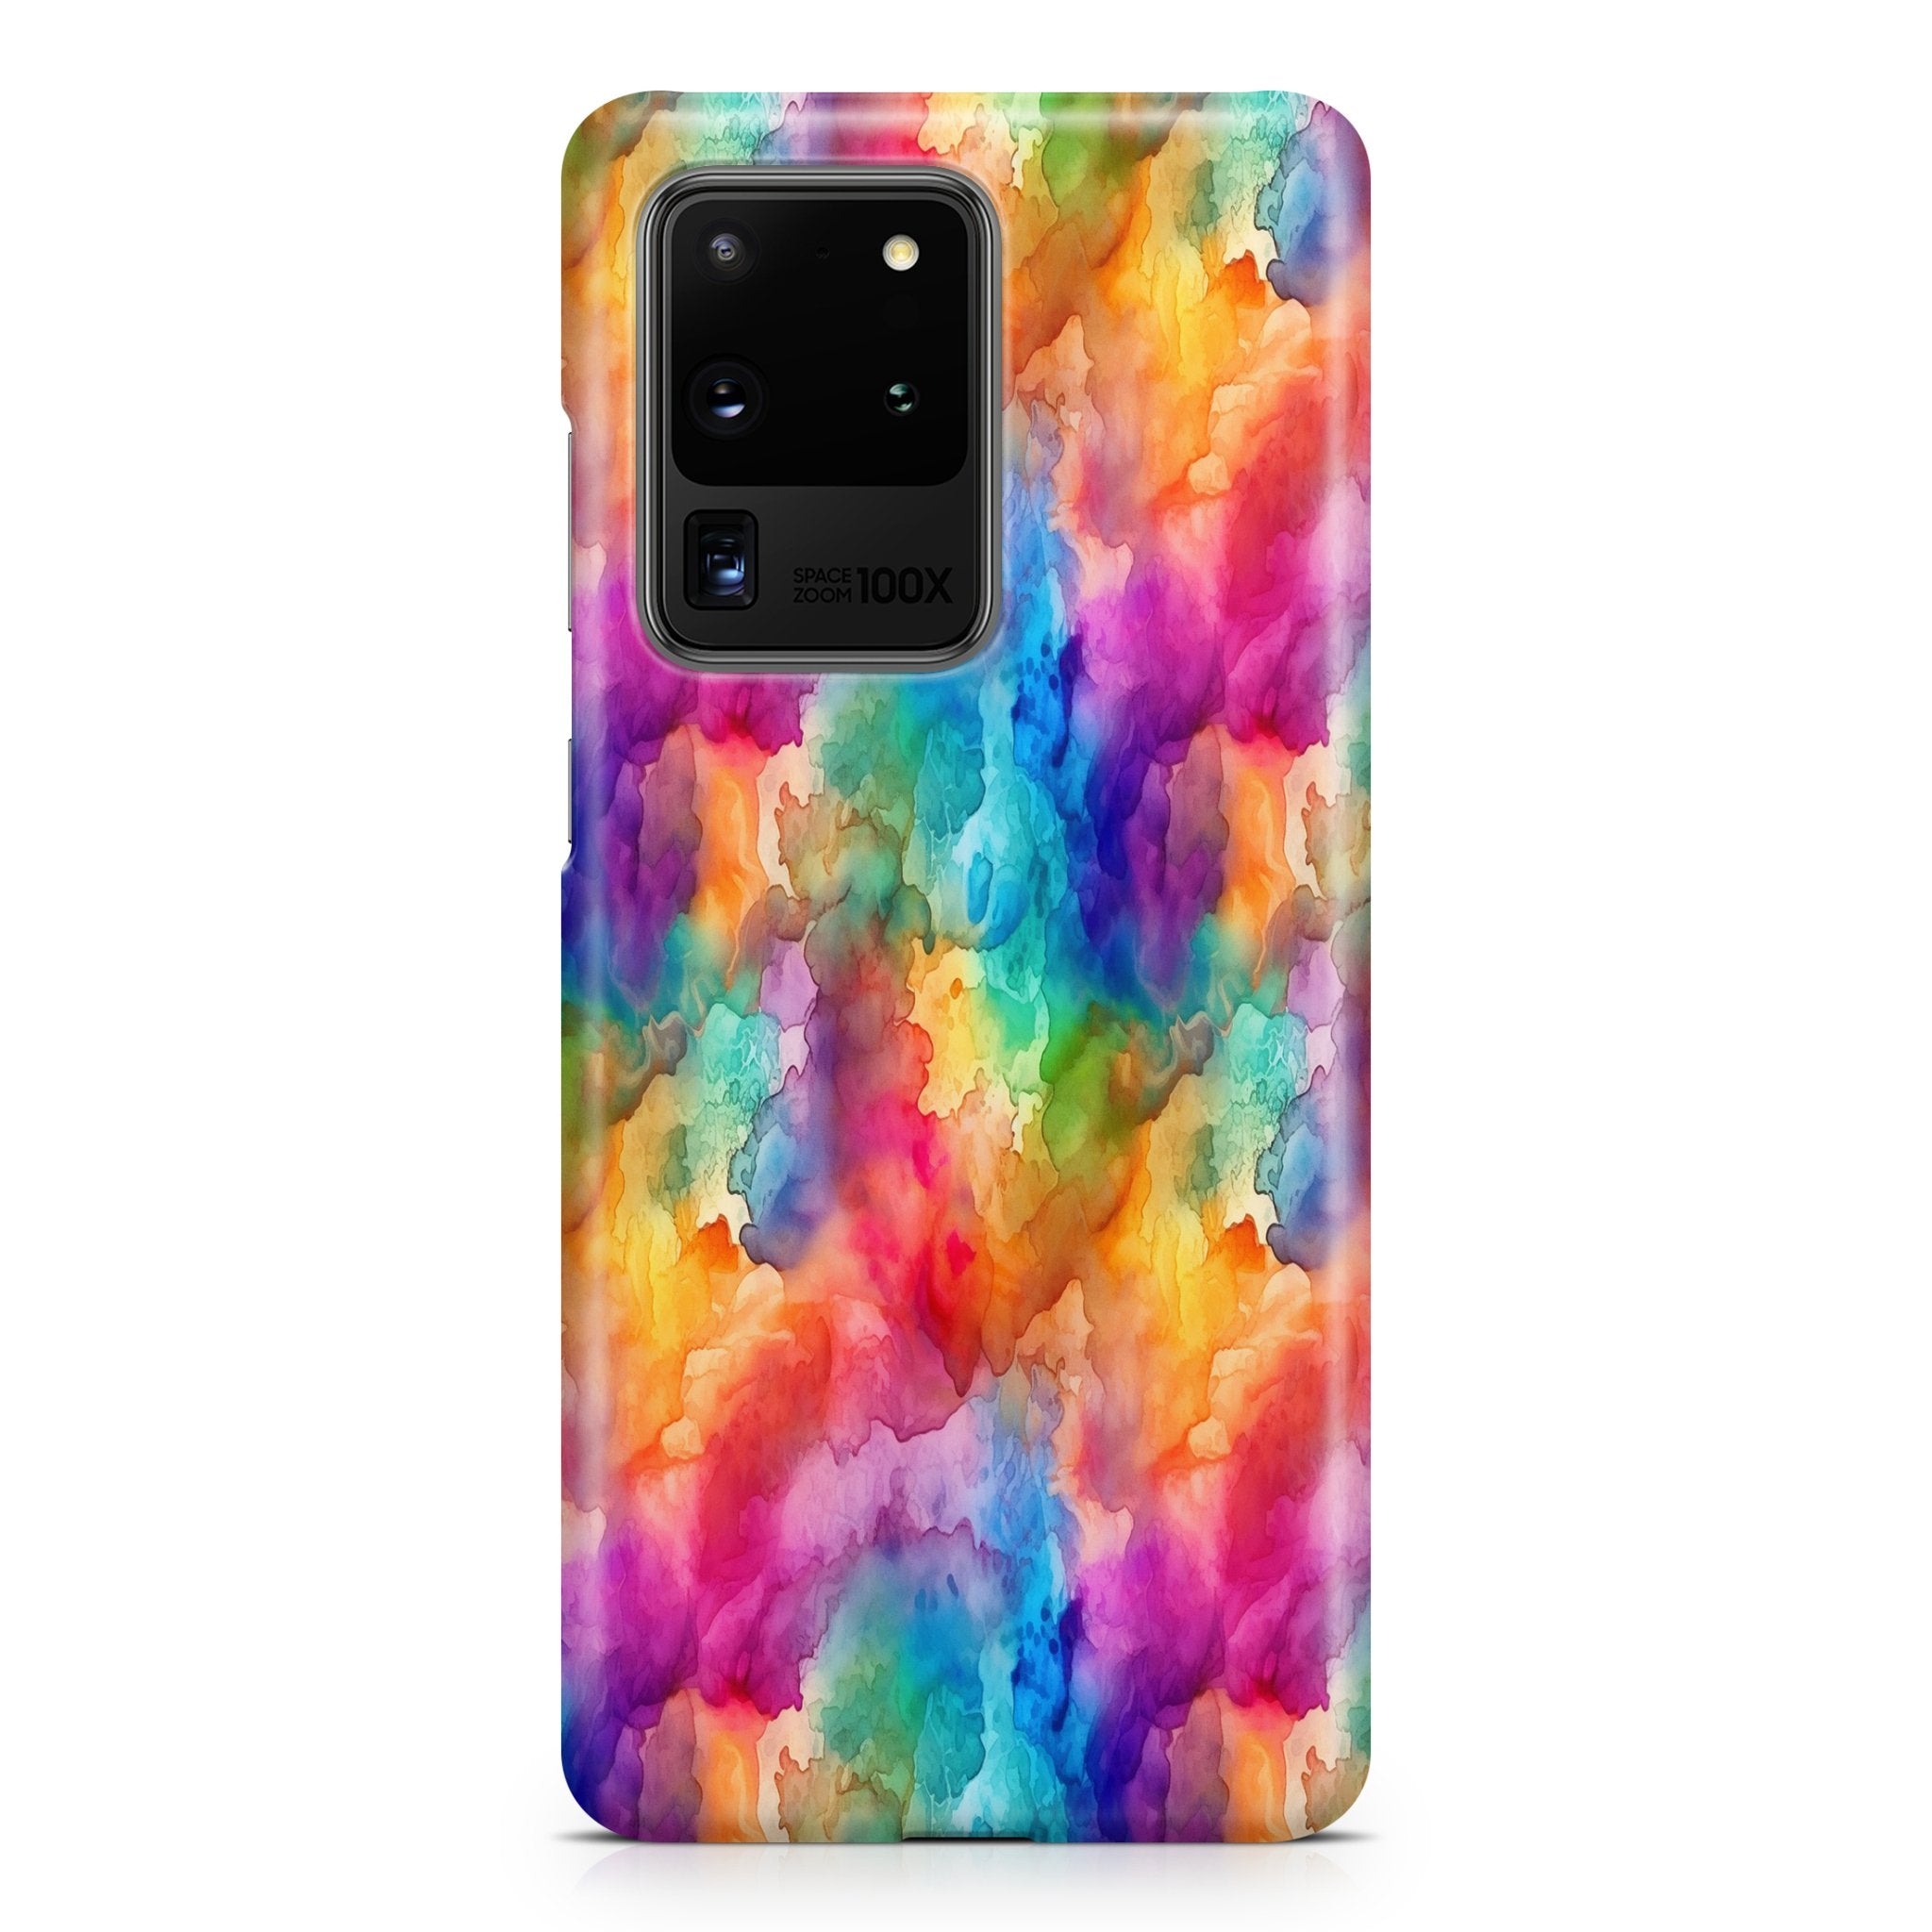 Colorful Mind - Samsung phone case designs by CaseSwagger